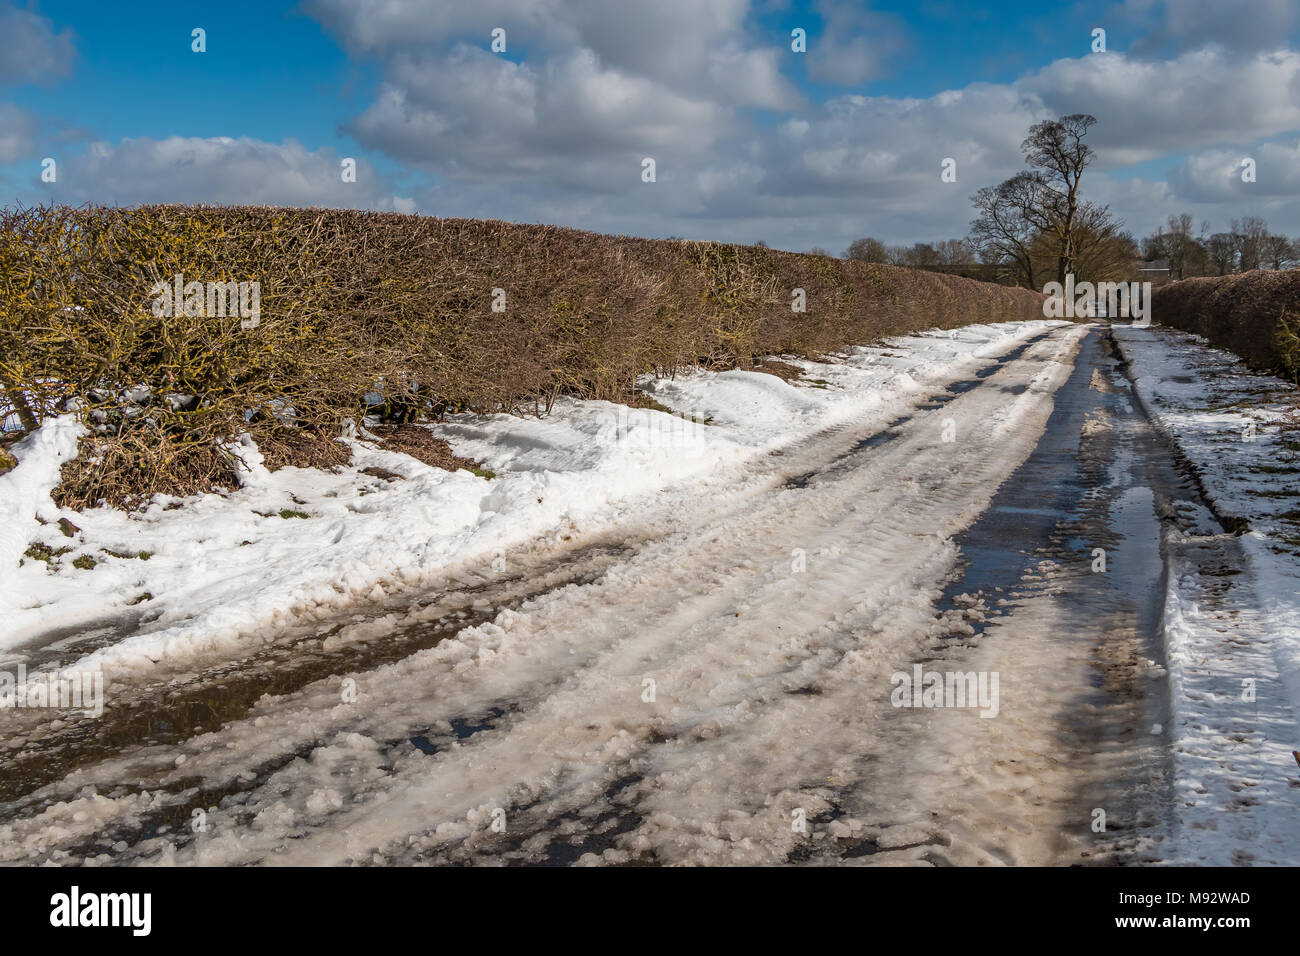 A rural country road with snow and ice thawing in bright sunshine after blizzard conditions two days earlier. Stock Photo